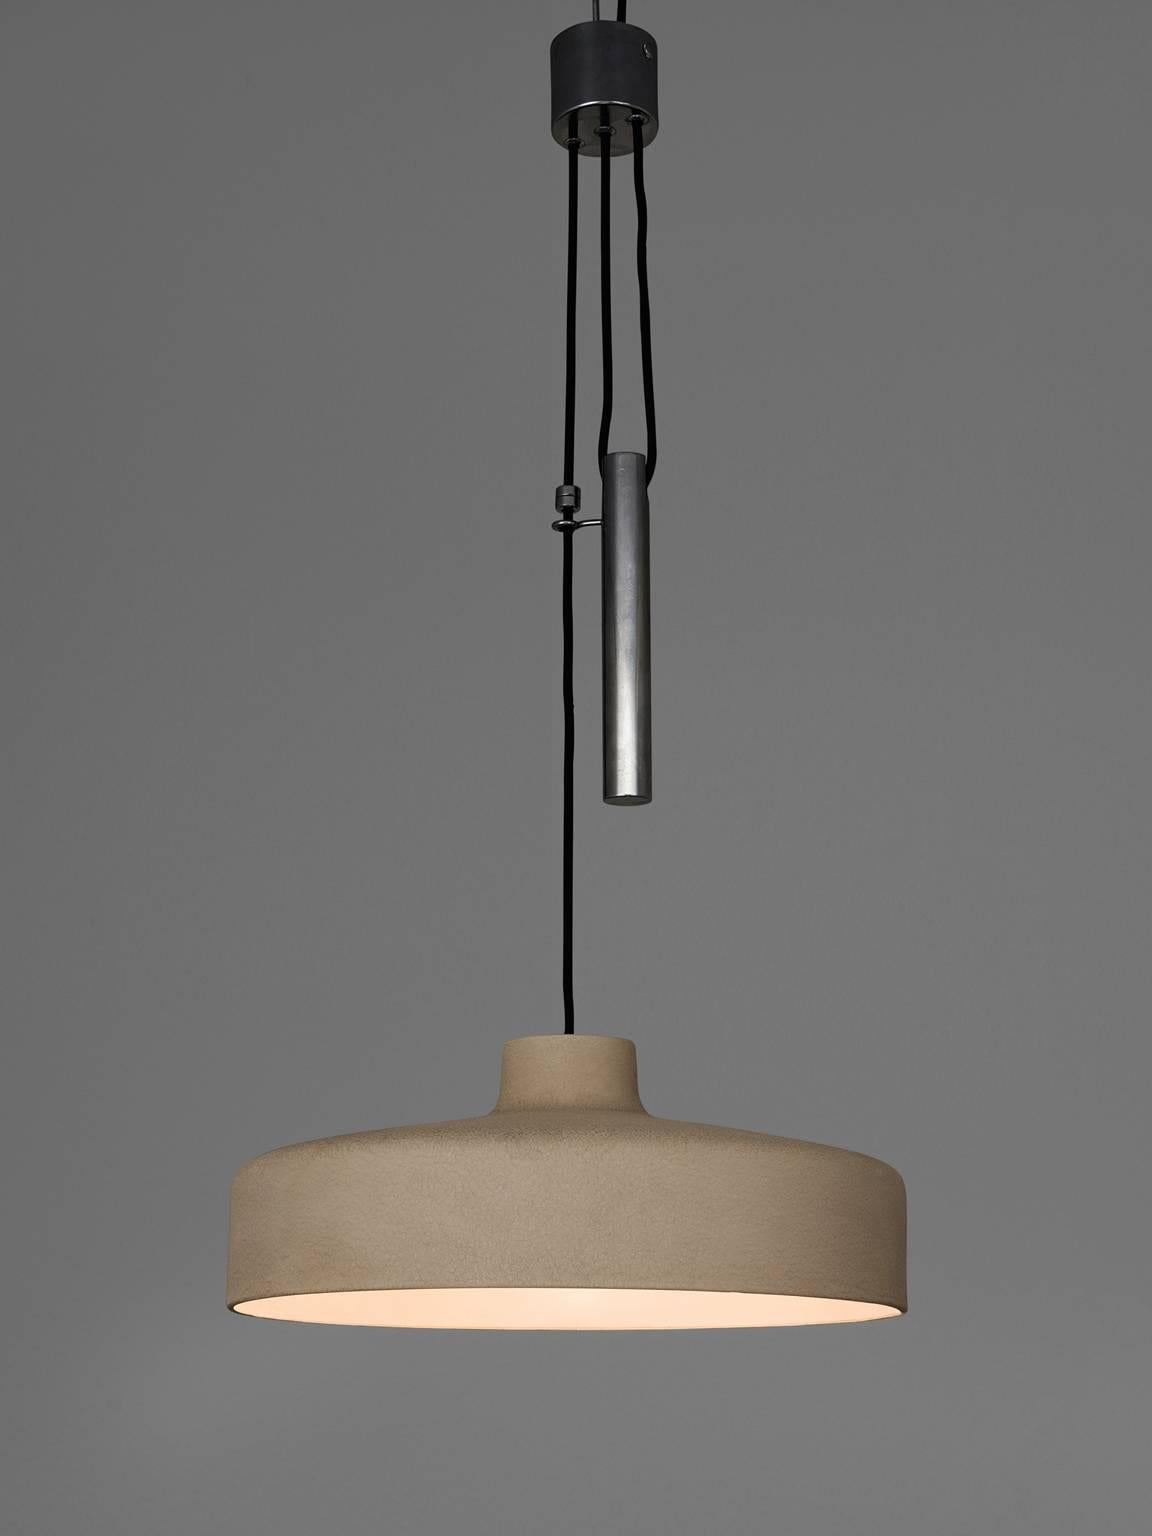 Gino Sarfatti for Arteluce, '194/N', white pendant, metal, wire, Italy, 1950.

This lamp features a chrome counterweight; the shade is is executed in lacquered aluminum. This exceptional pendant by Arteluce features a minimalist design and a